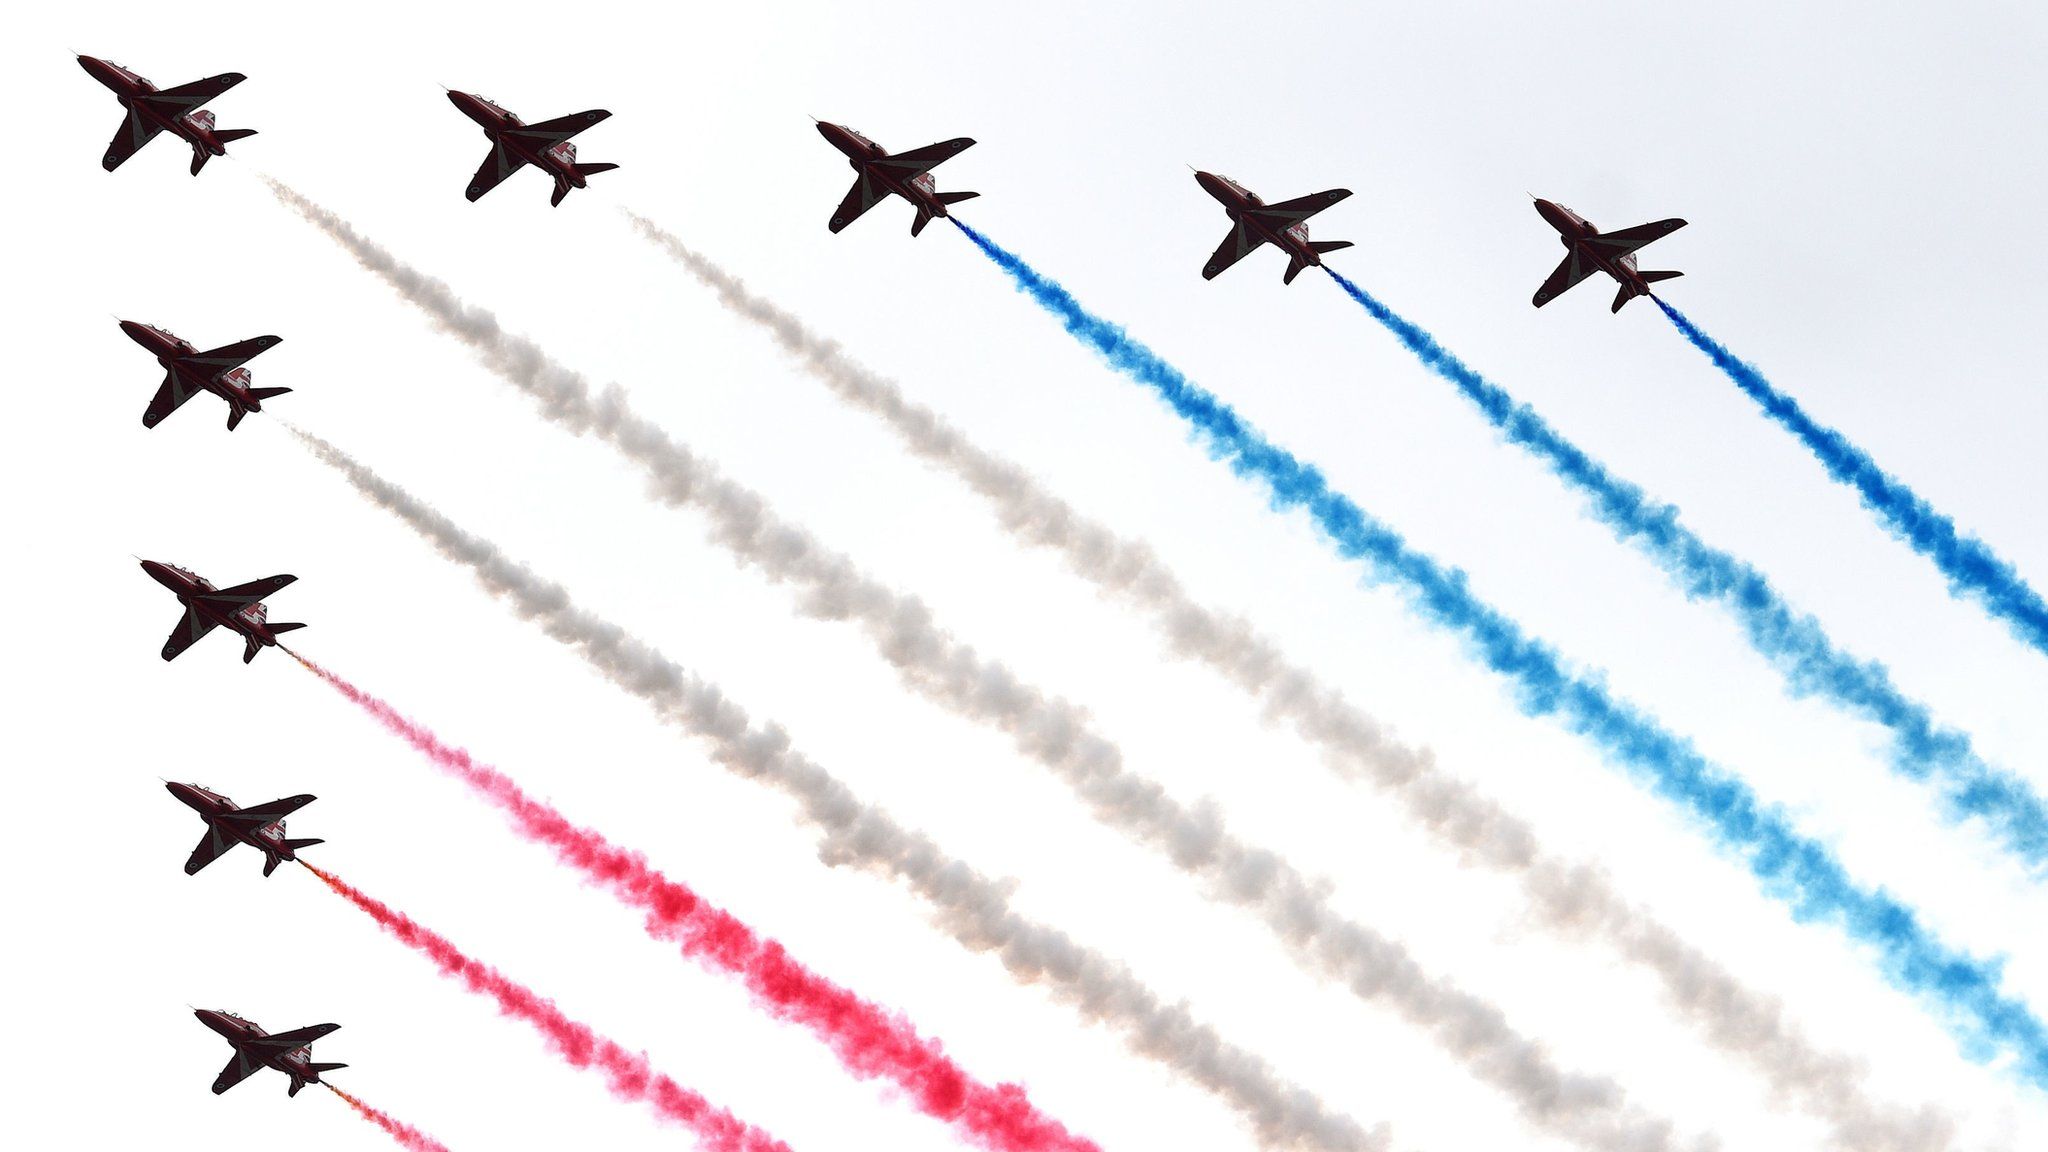 Red Arrows flying over Buckingham Palace, London in the Royal Air Force 100 flypast to mark the RAF's centenary.